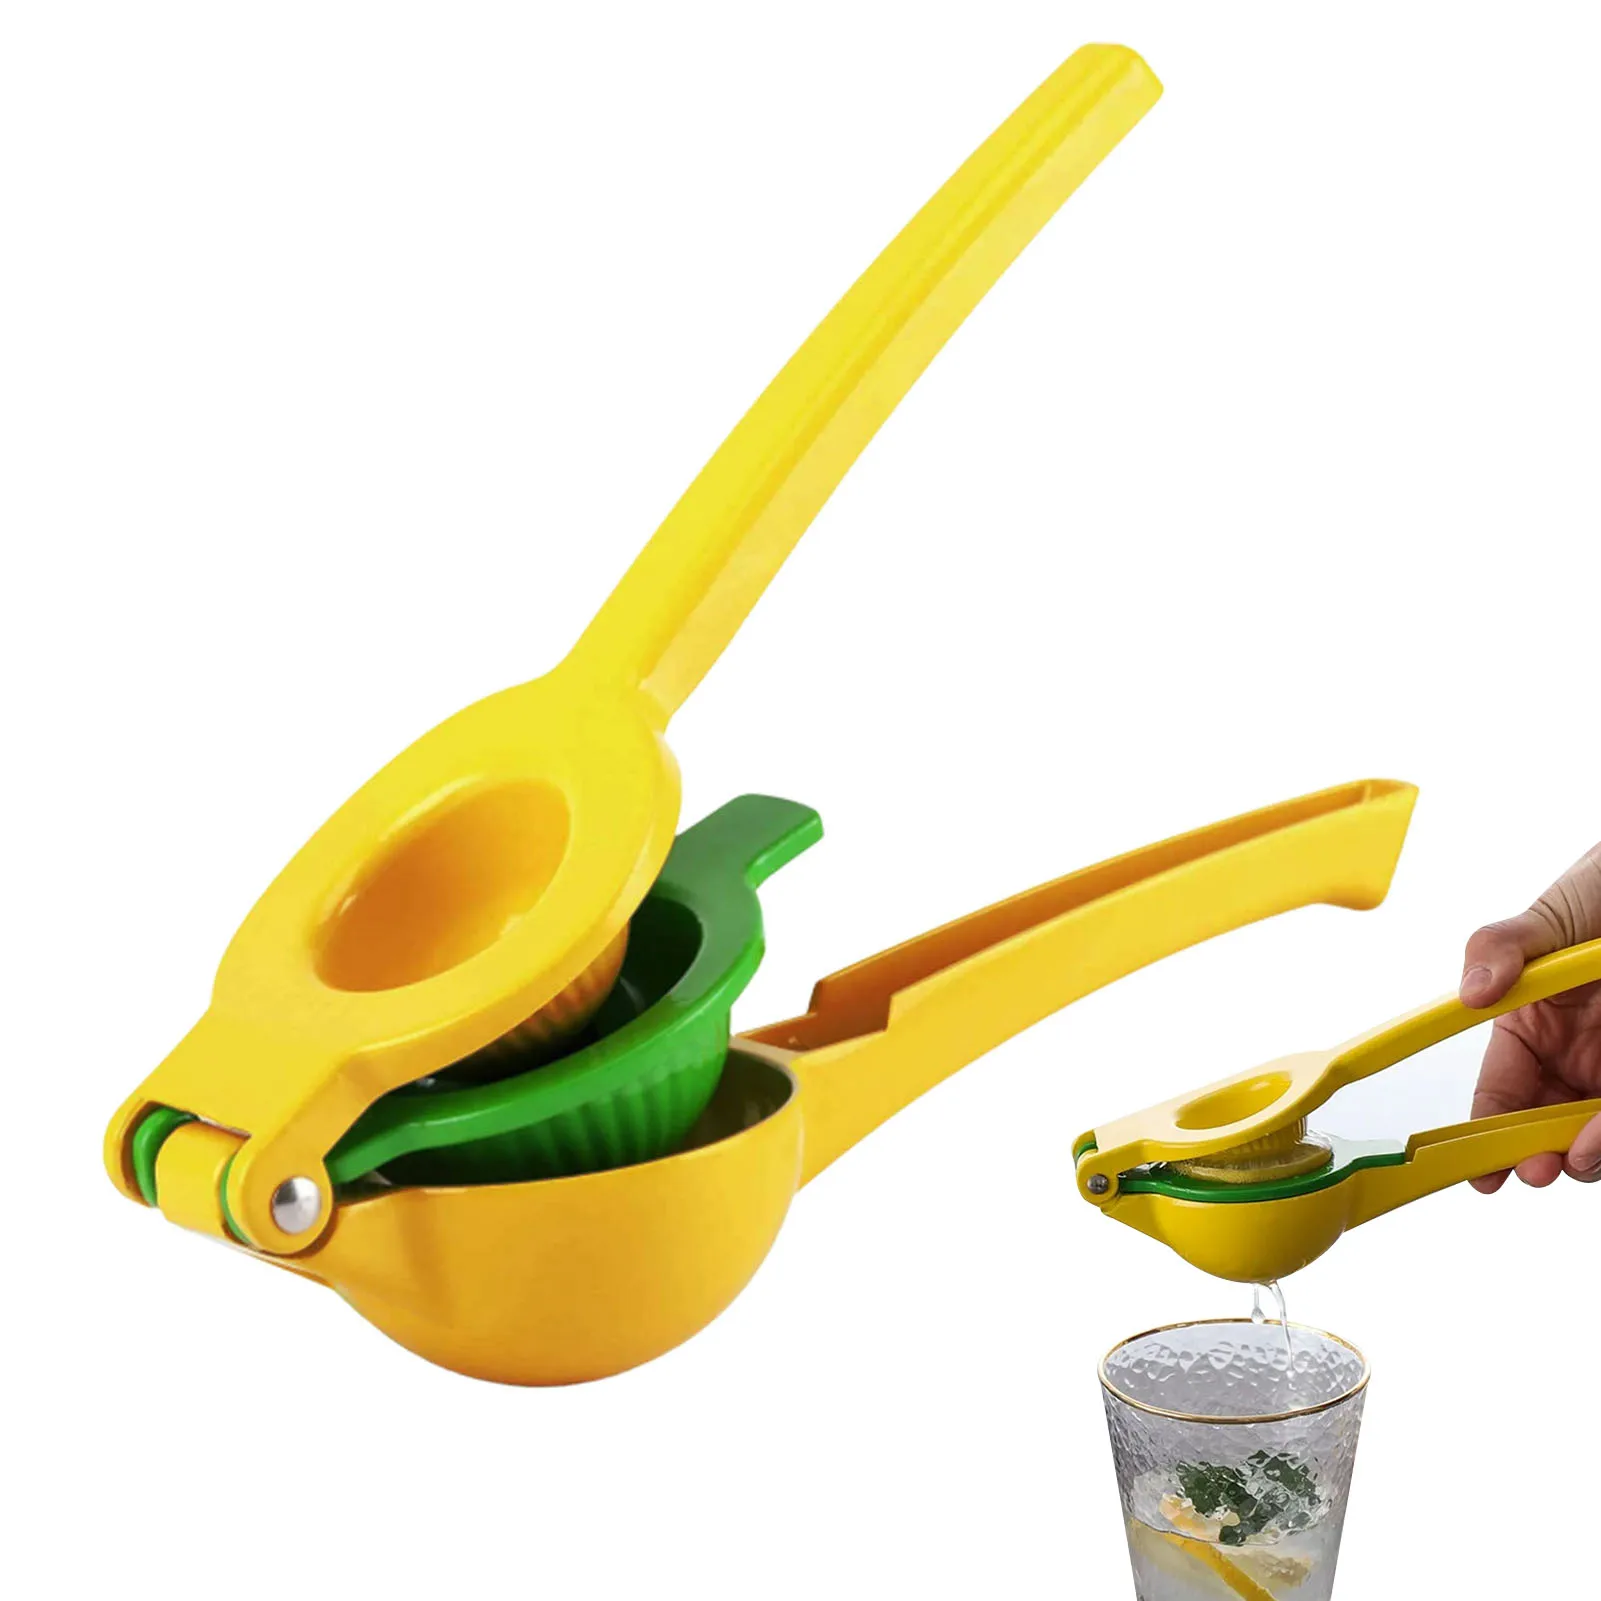 

Lemon Squeezer Juicer Juicer Hand Juicer Machines 2-In-1 Metal Lemon Squeezer Citrus Juicer Manual Press For Extracting The Most